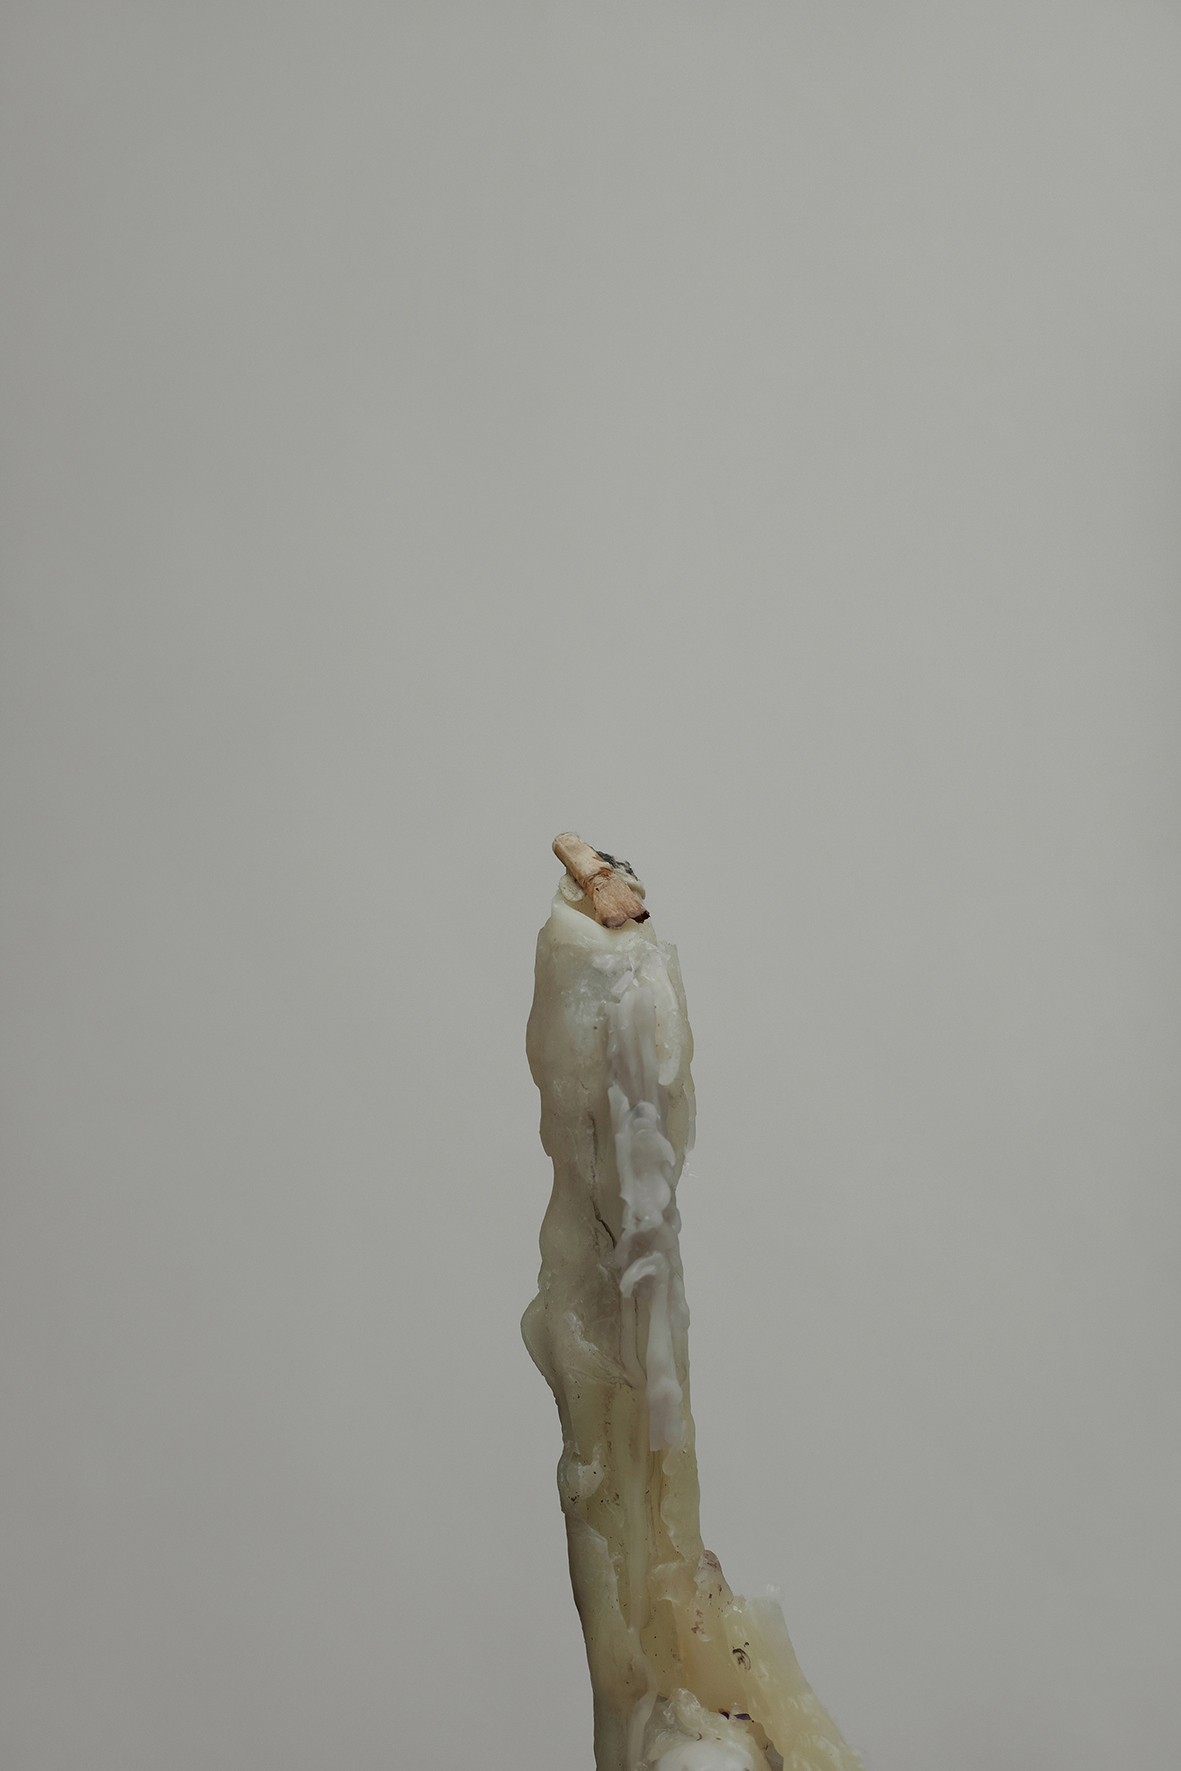 Intention Ghosts (retitled), 2021/24, series, candle remnants, wax, armatures, various materials, dimensions variable (detail)